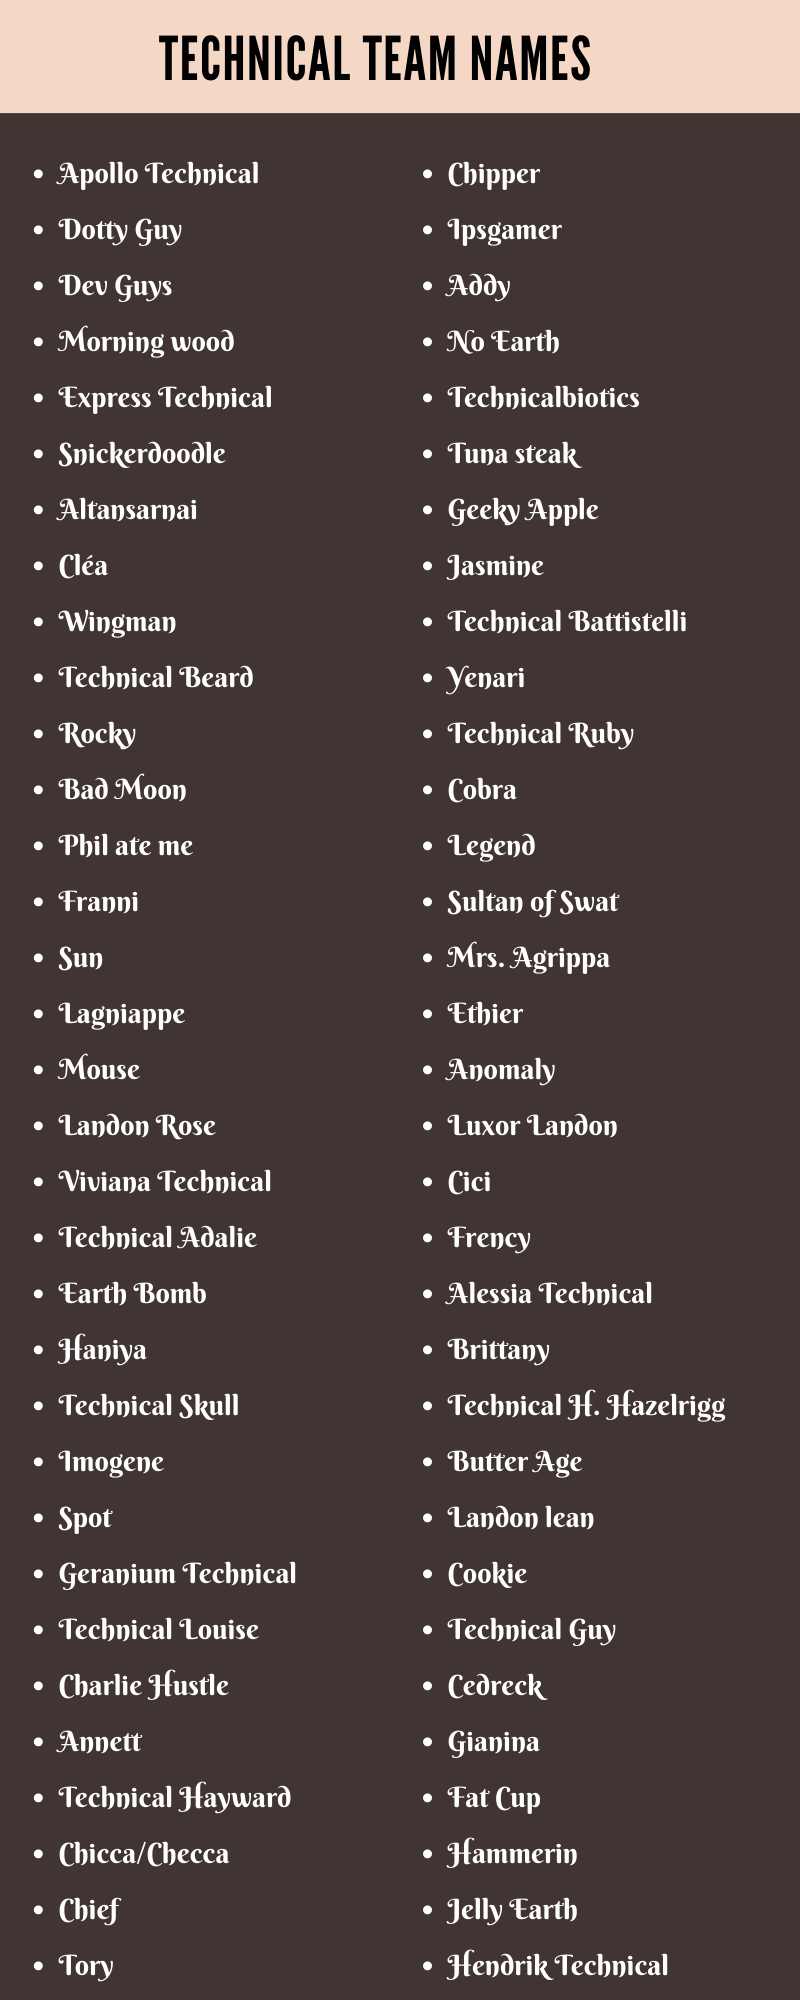 400 Cool Technical Team Names Ideas and Suggestions